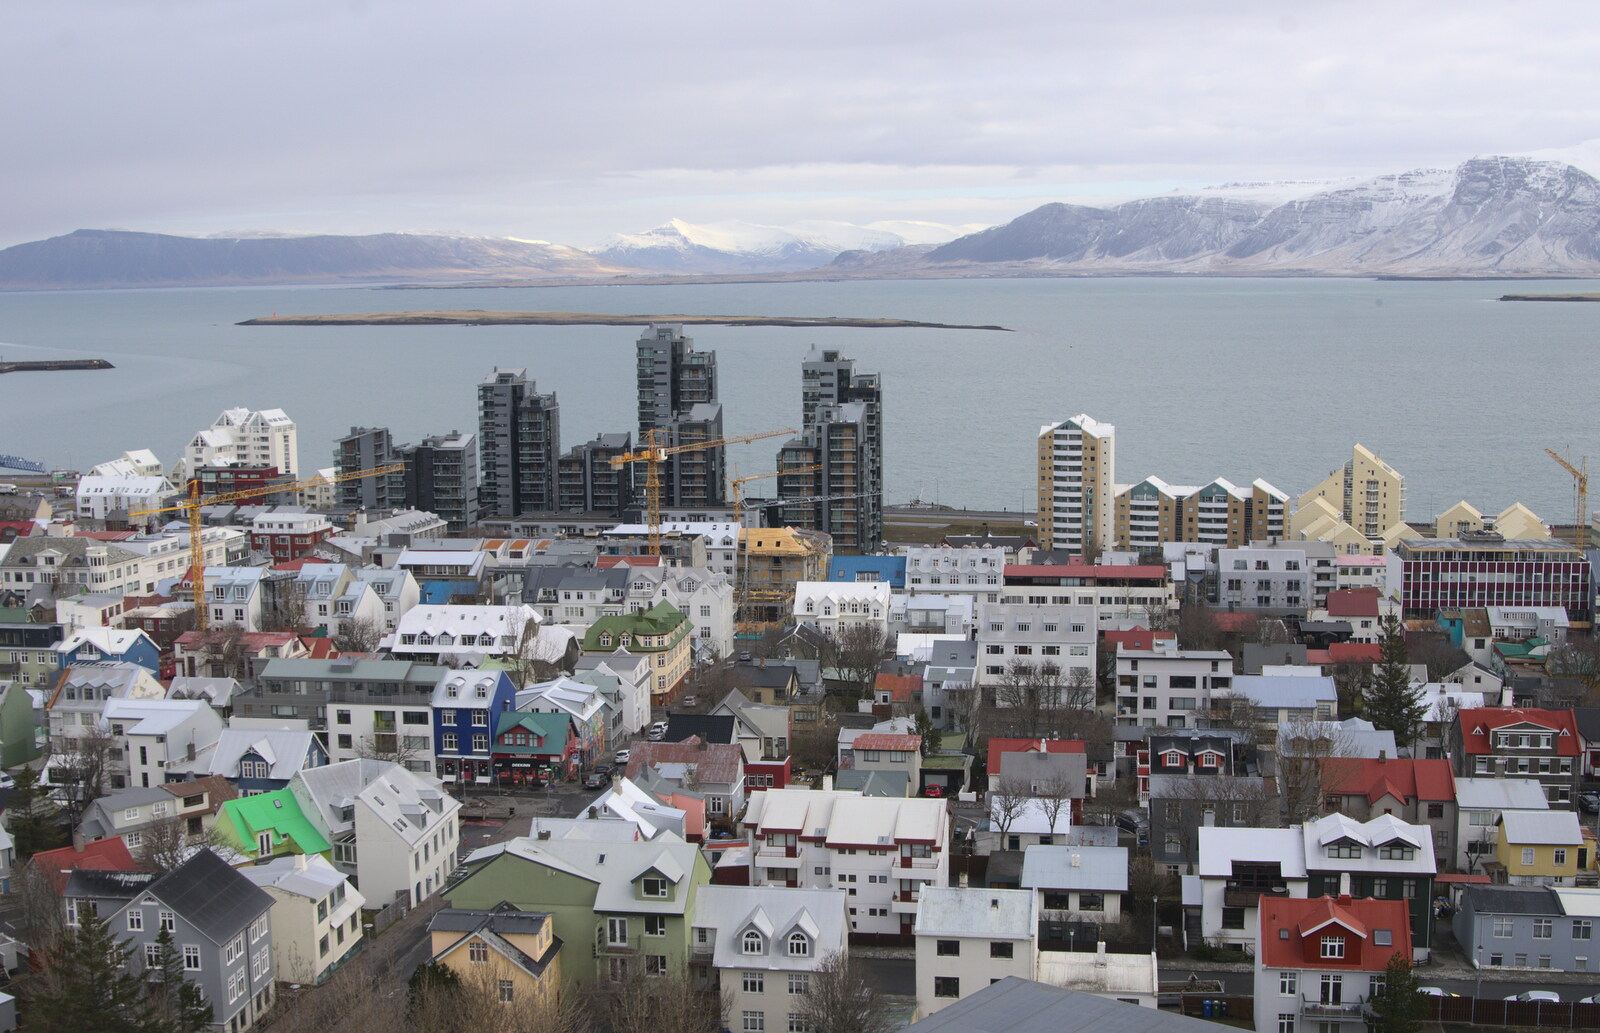 Impressive views from the cathedral tower from Hallgrímskirkja Cathedral and Whale Watching, Reykjavik - 21st April 2017